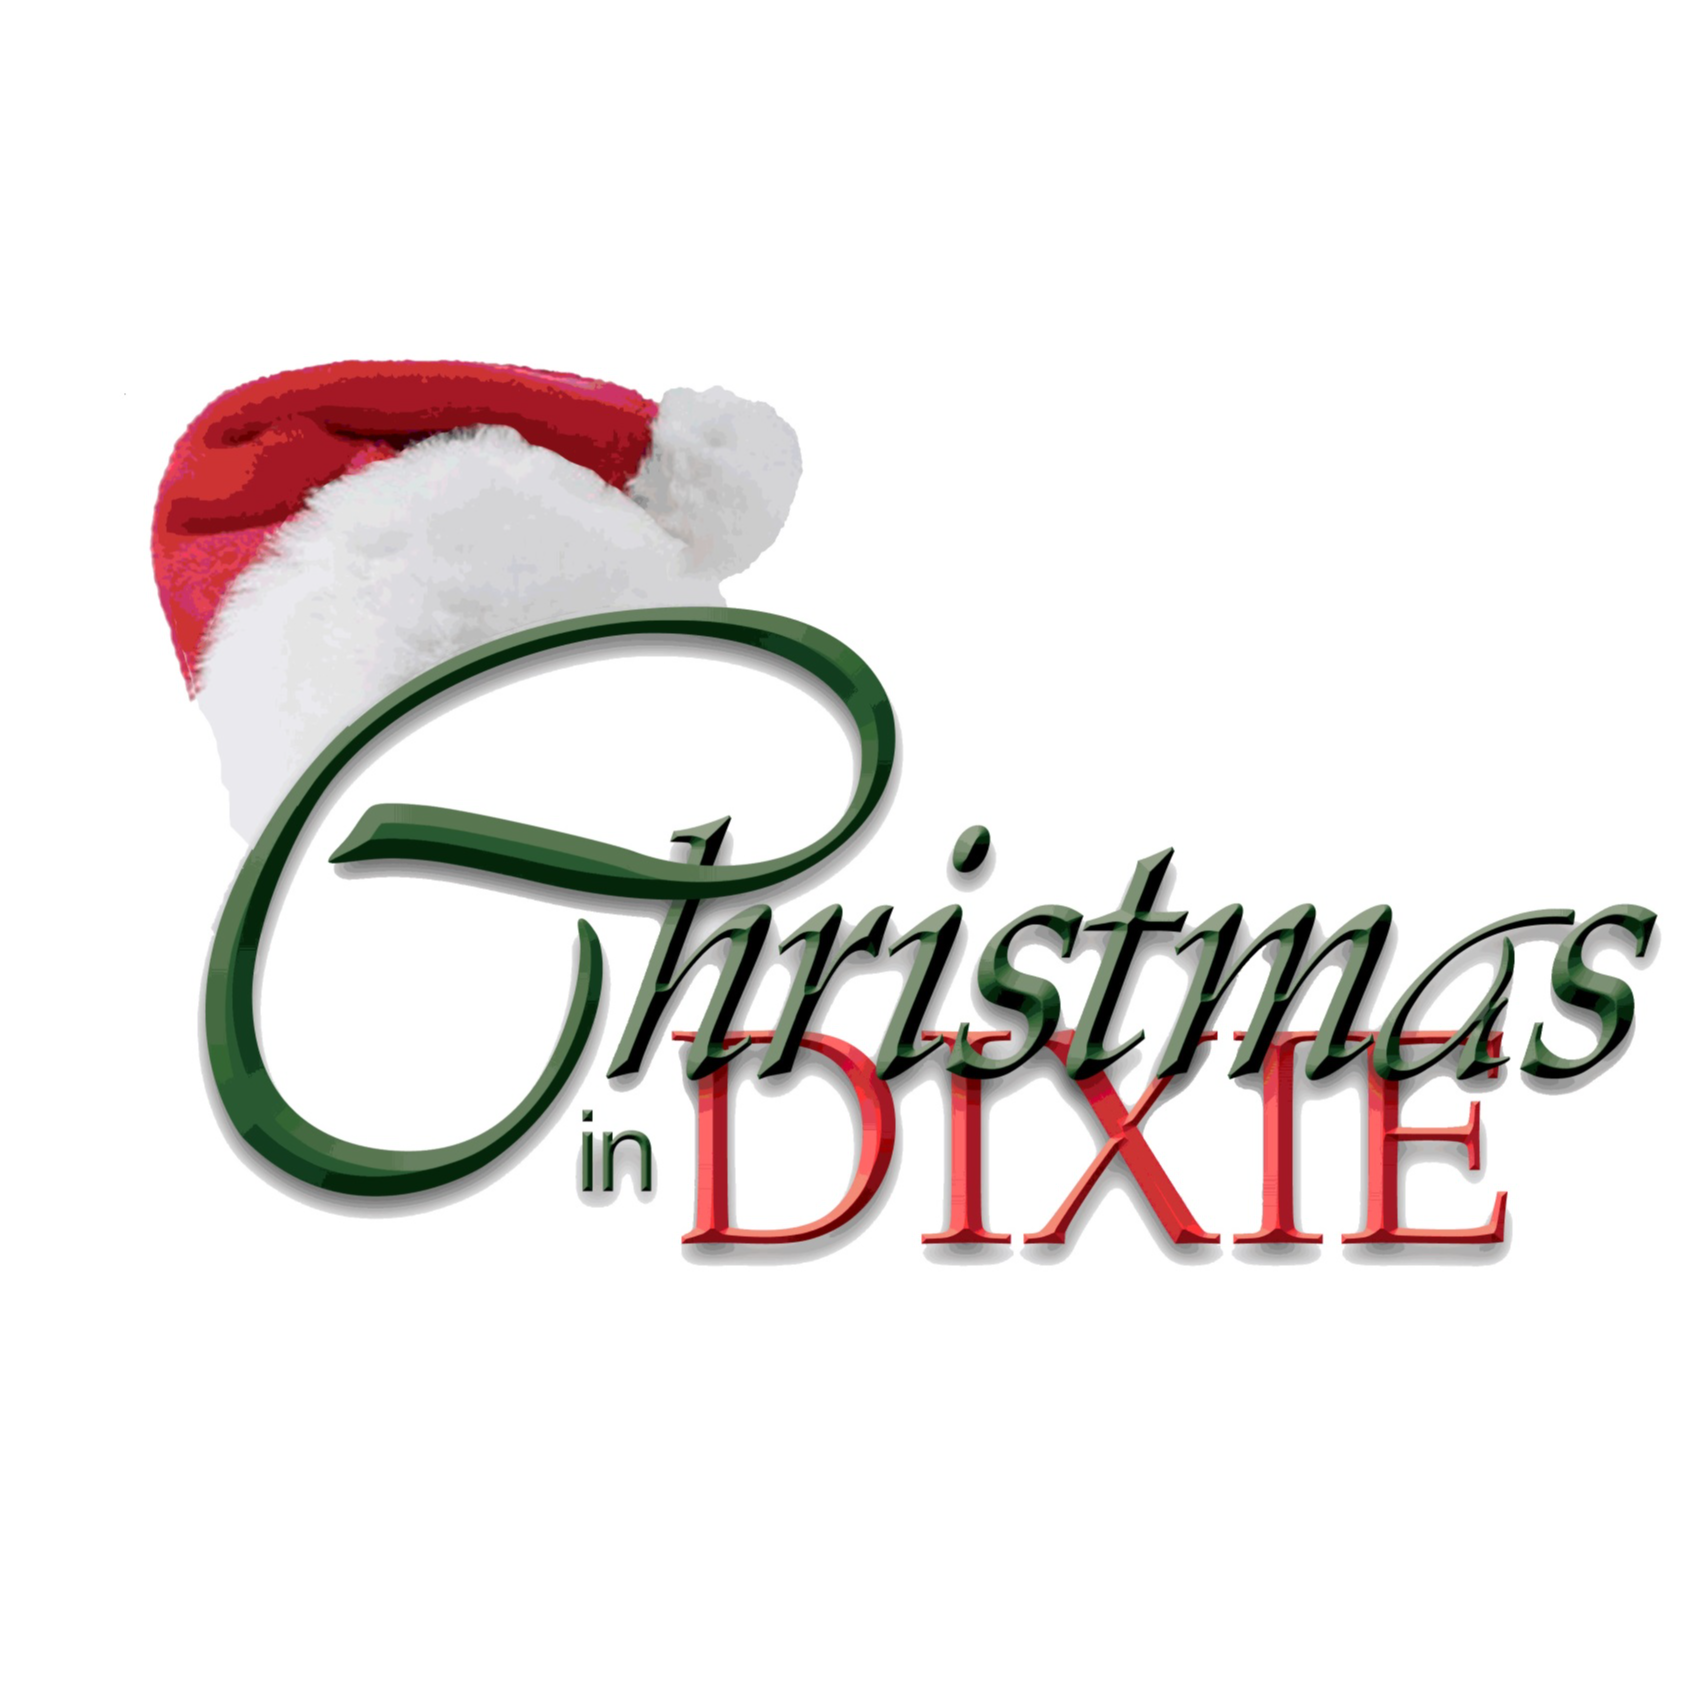 Christmas in Dixie